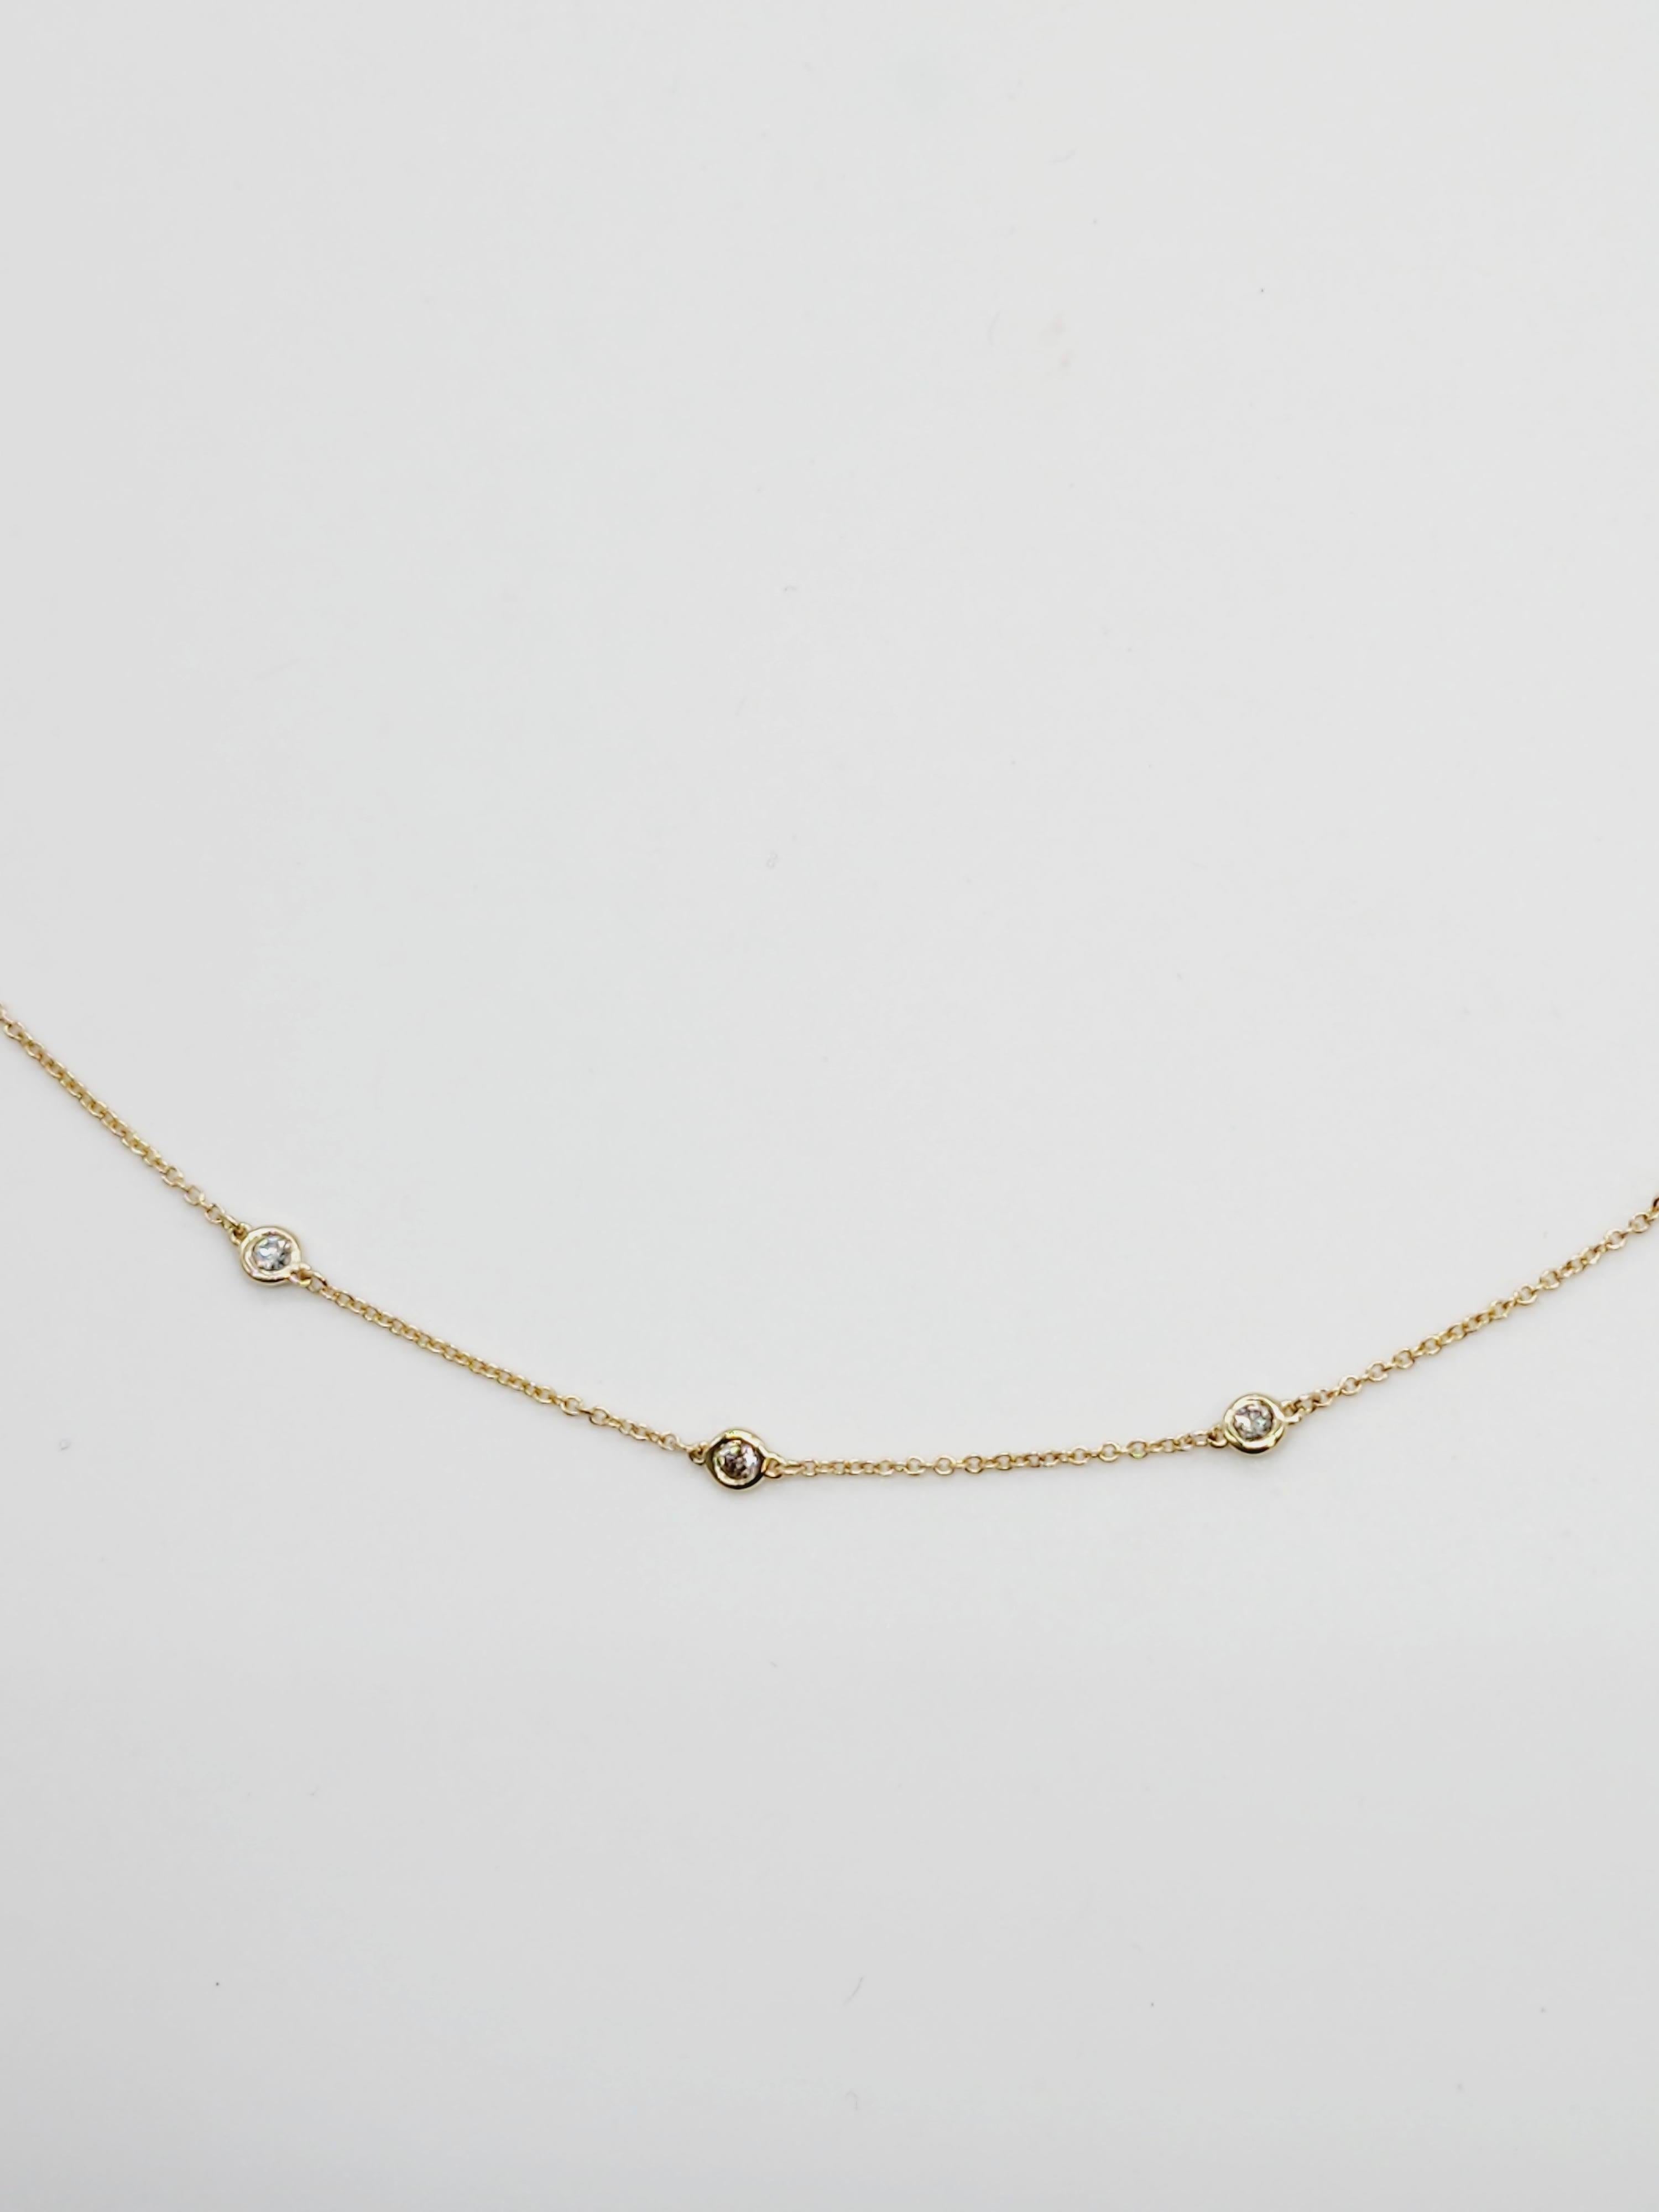 Women's 1.50 Carats 27 Stations Diamond by the Yard Necklace 14 Karat Yellow Gold